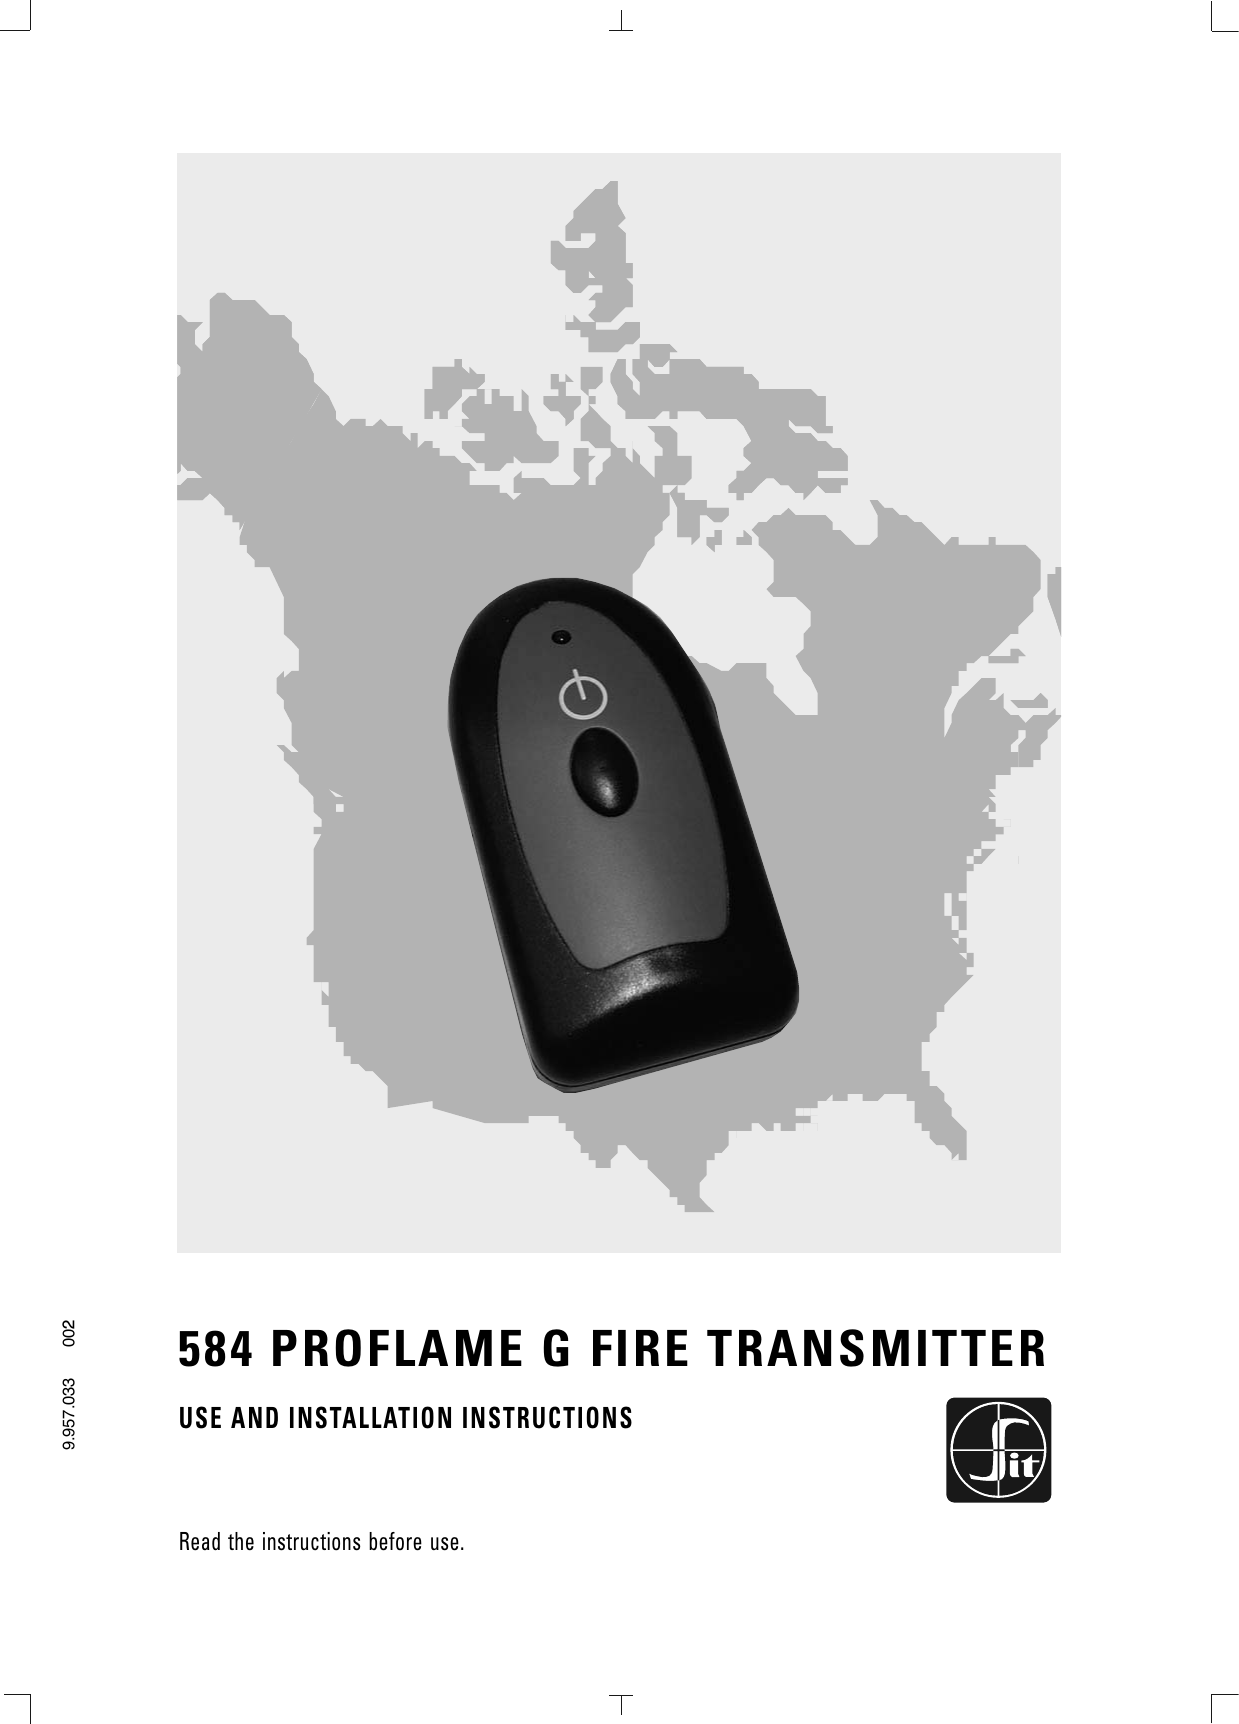 9.957.033       002 584 PROFLAME G FIRE TRANSMITTERUSE AND INSTALLATION INSTRUCTIONSRead the instructions before use. This control must be installed in accordance with the rules in force.